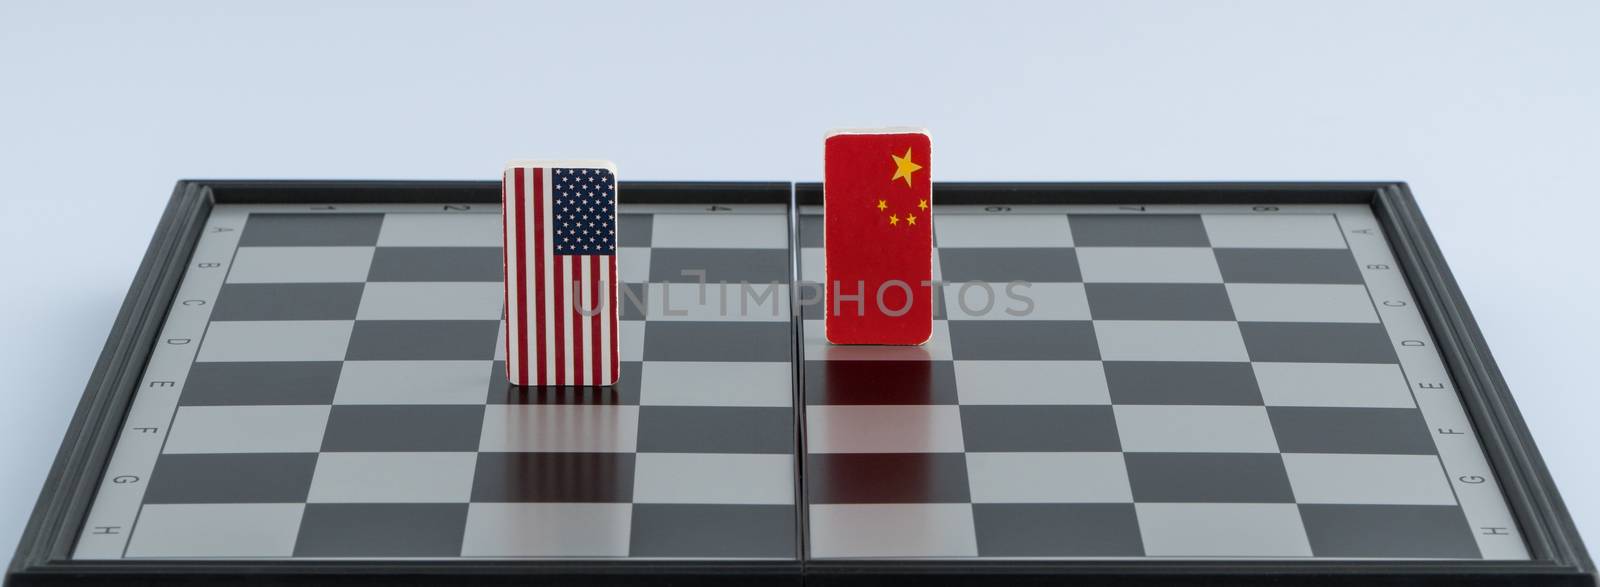 Symbols of the flag of the USA and China on the chessboard. The concept of political game.